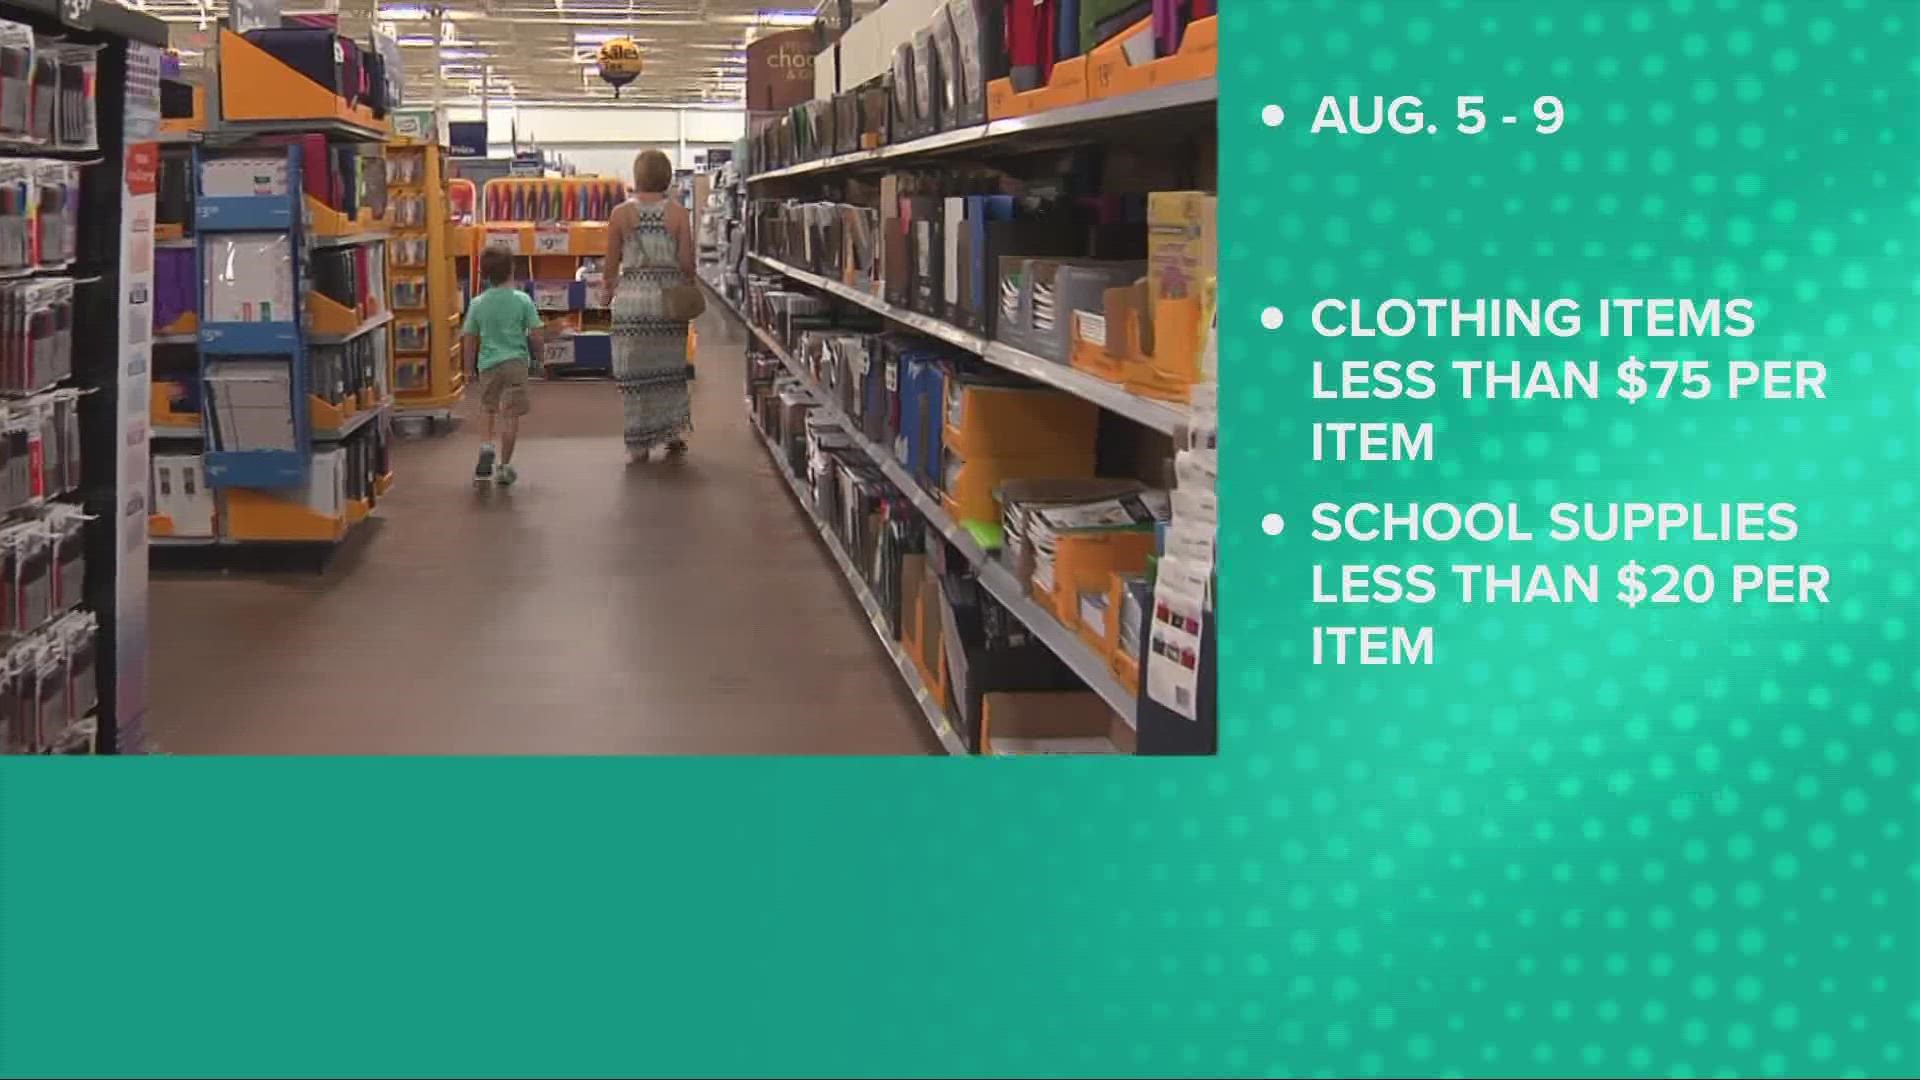 Clothing items costing less than $75 per item and school supplies and instructional material costing less than $20 per item will be tax-free.